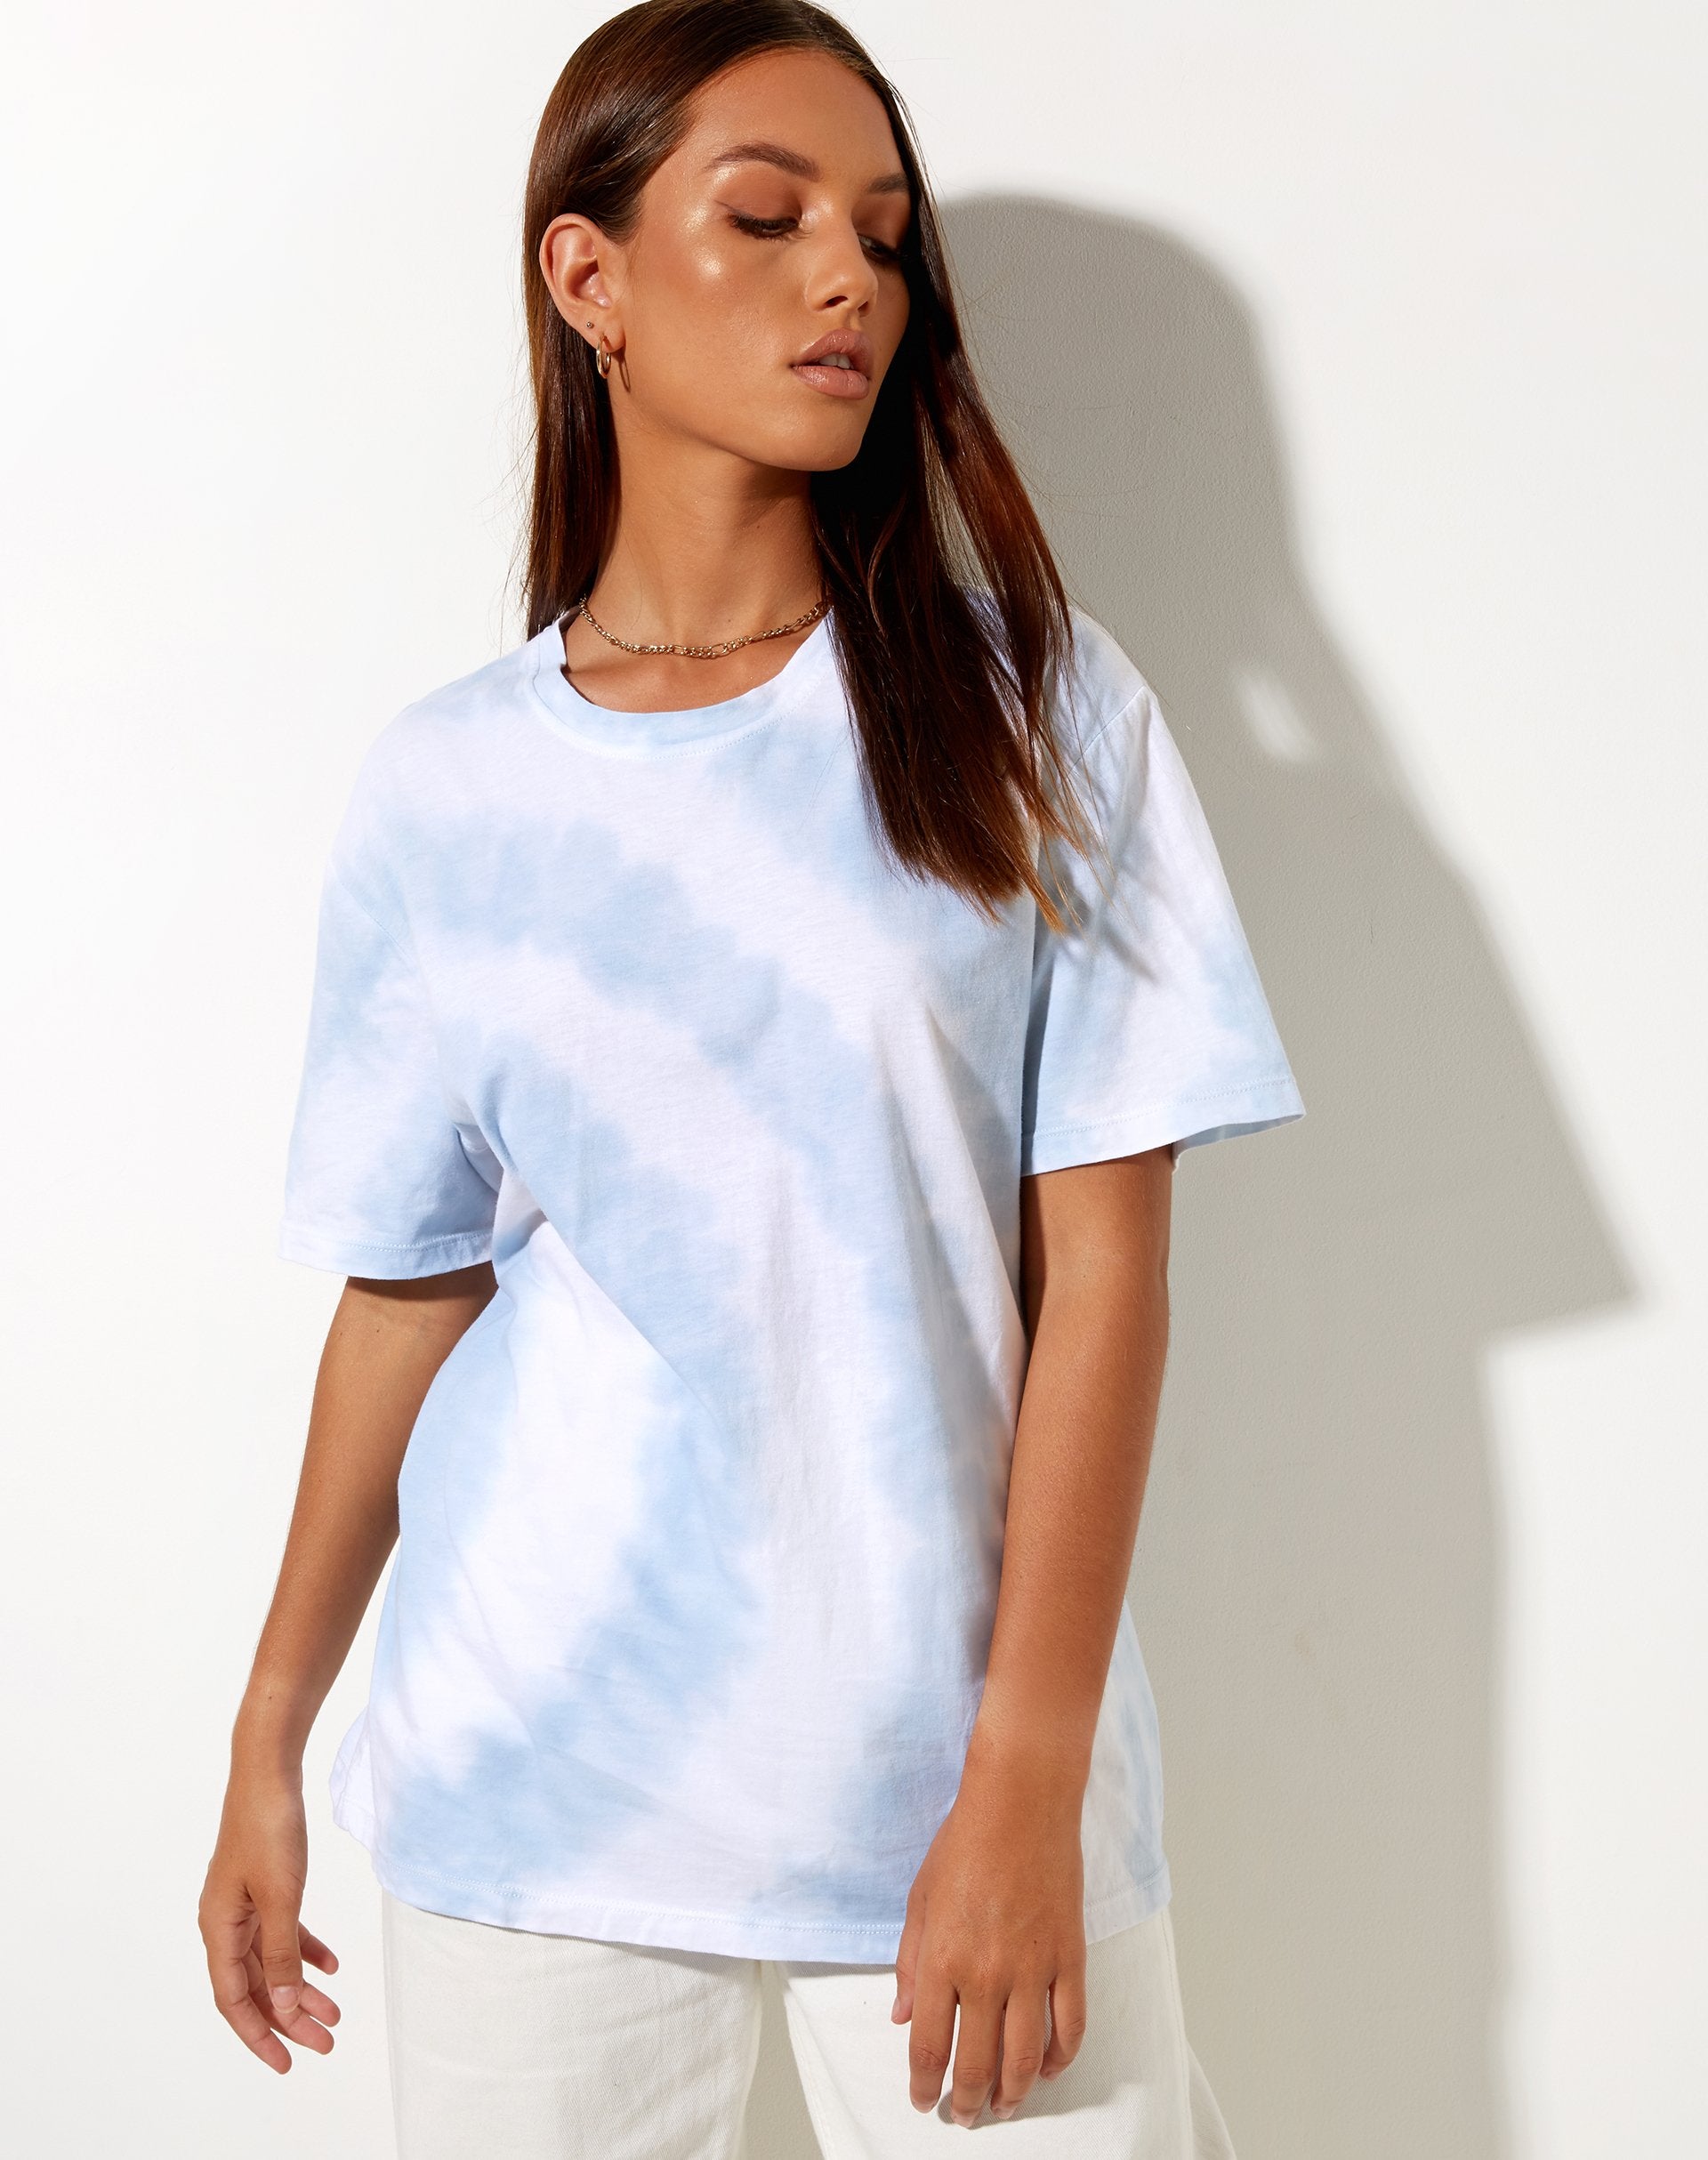 Image of Oversize Basic Tee in Blue and White Swirl Tie Dye